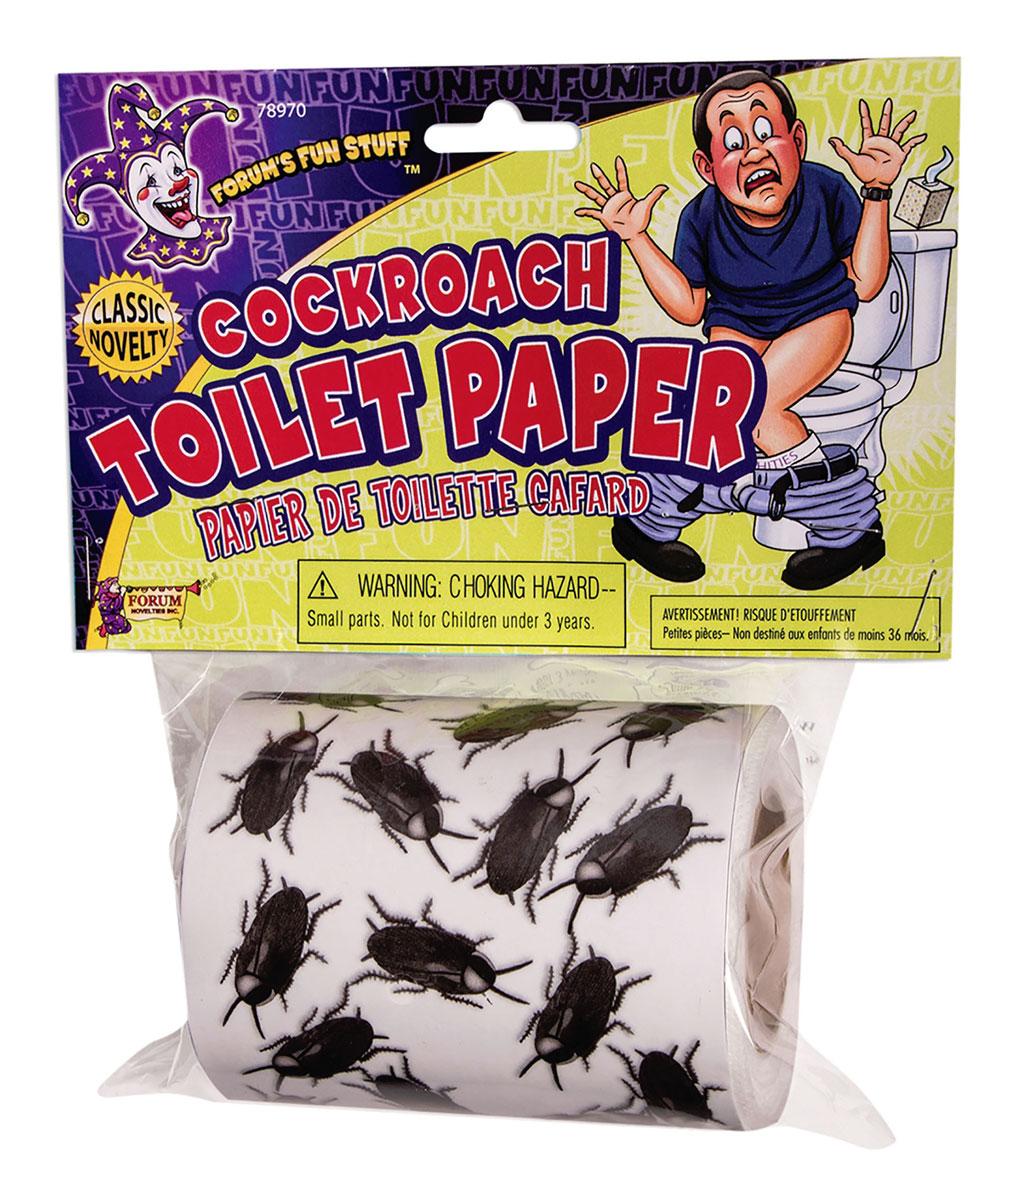 Cockroach Toilet Paper Joke Decoration by Forum Novelties 78970 available here at Karnival Costumes online party shop